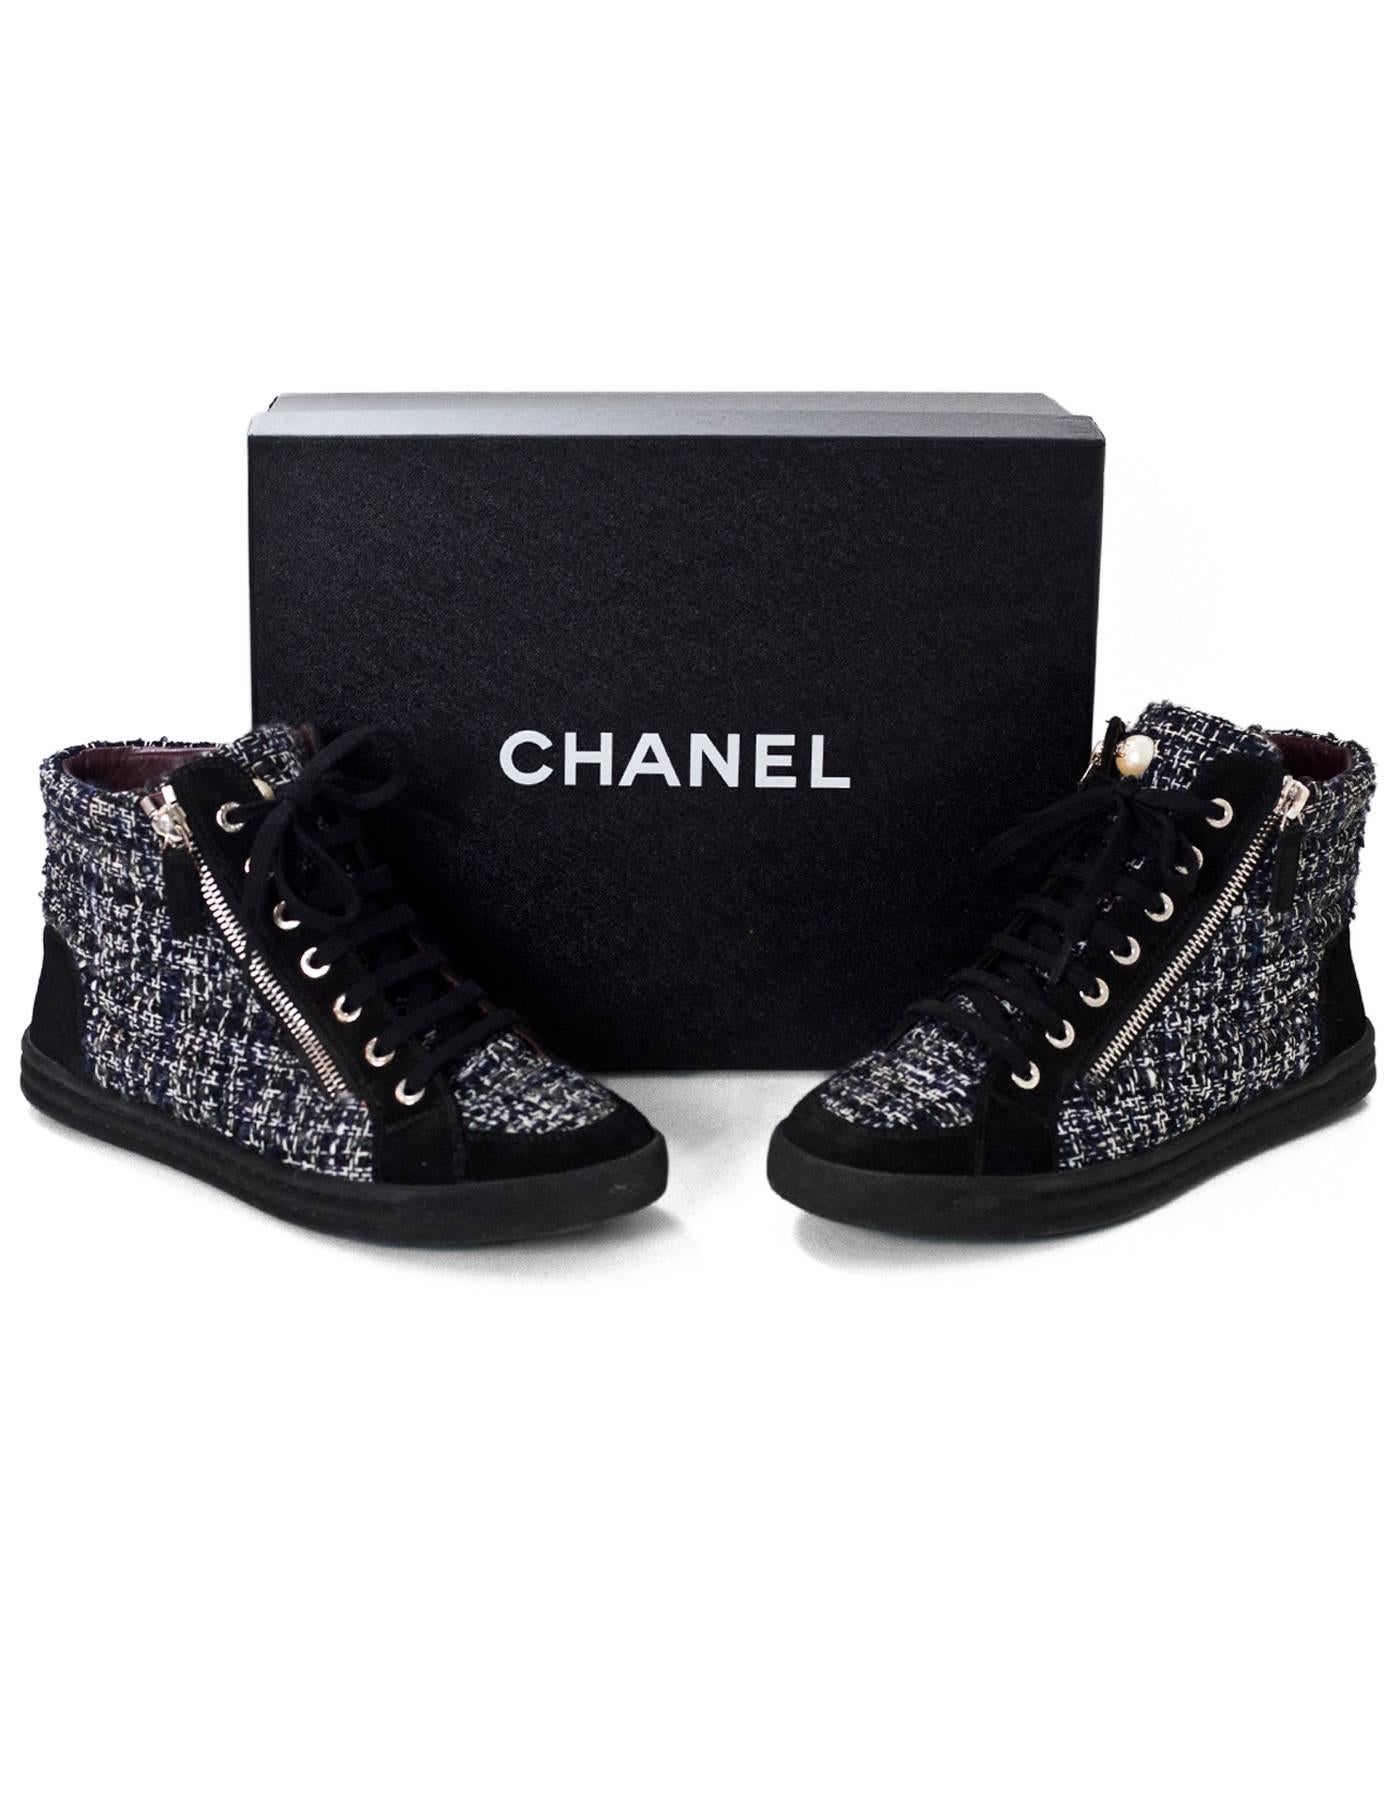 Gray Chanel Black, White & Grey Tweed High Top Sneakers Sz 37 with Box